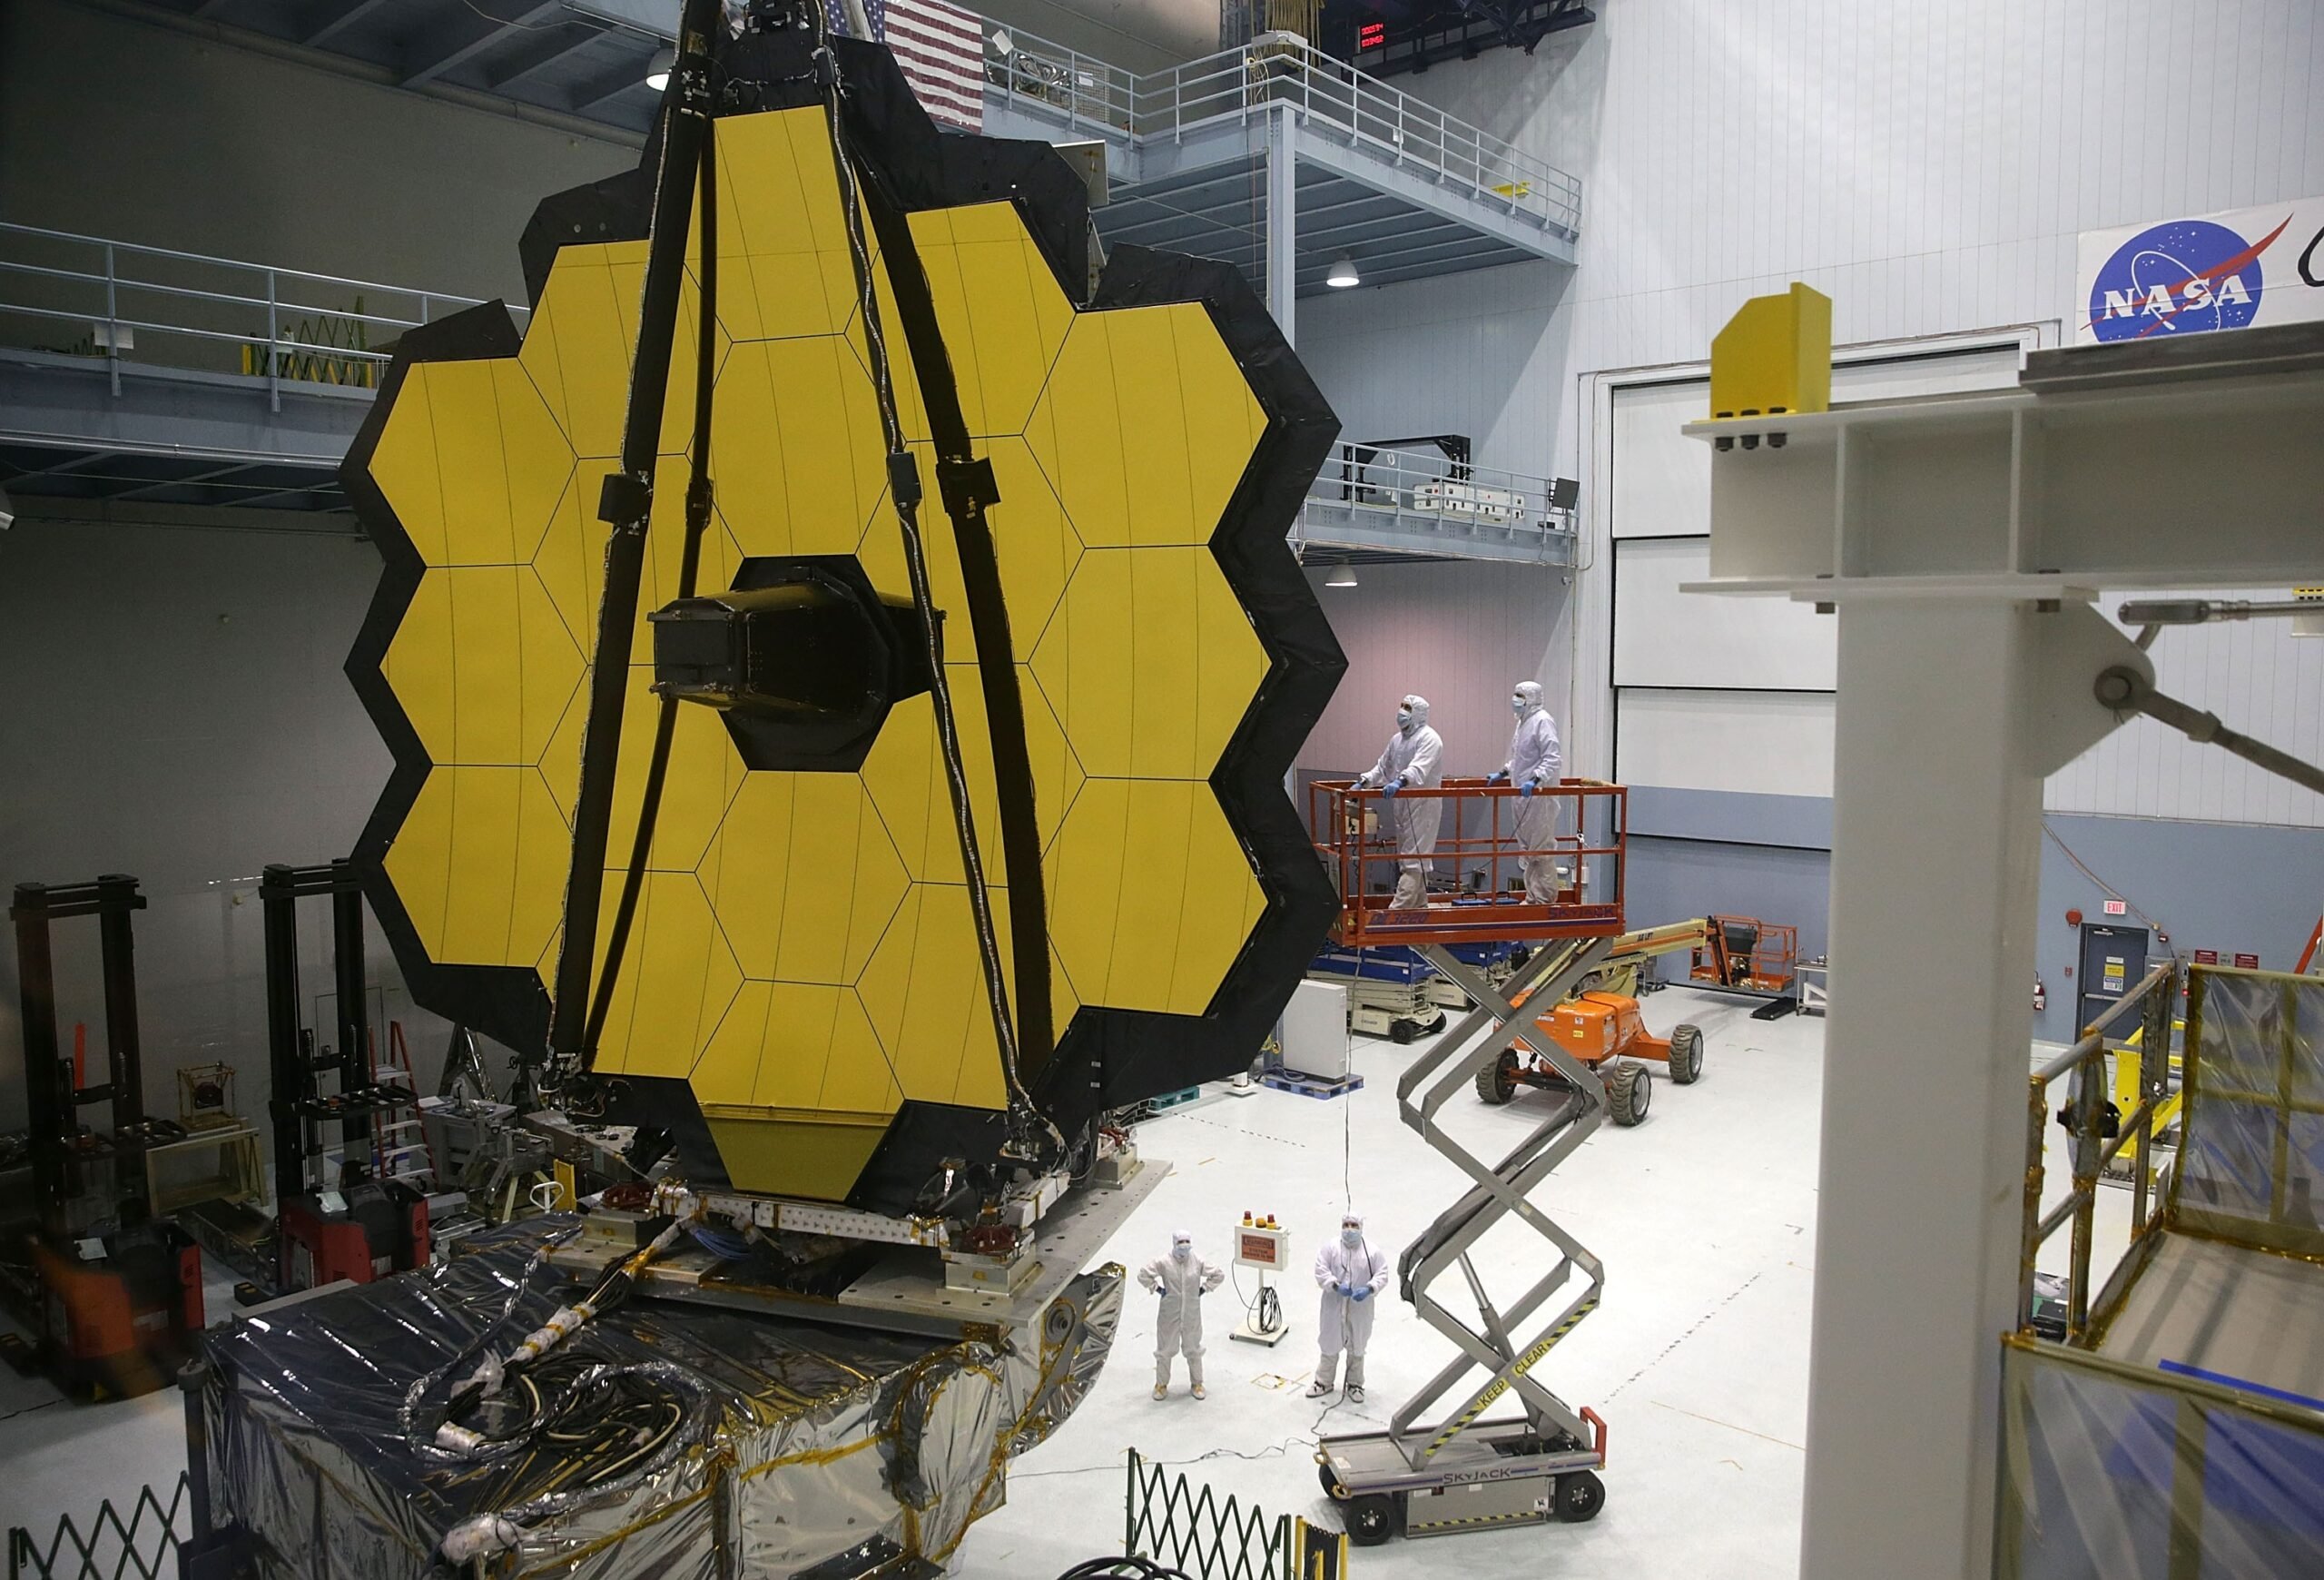 The launch of the James Webb Space Telescope is almost here. What will we discover?